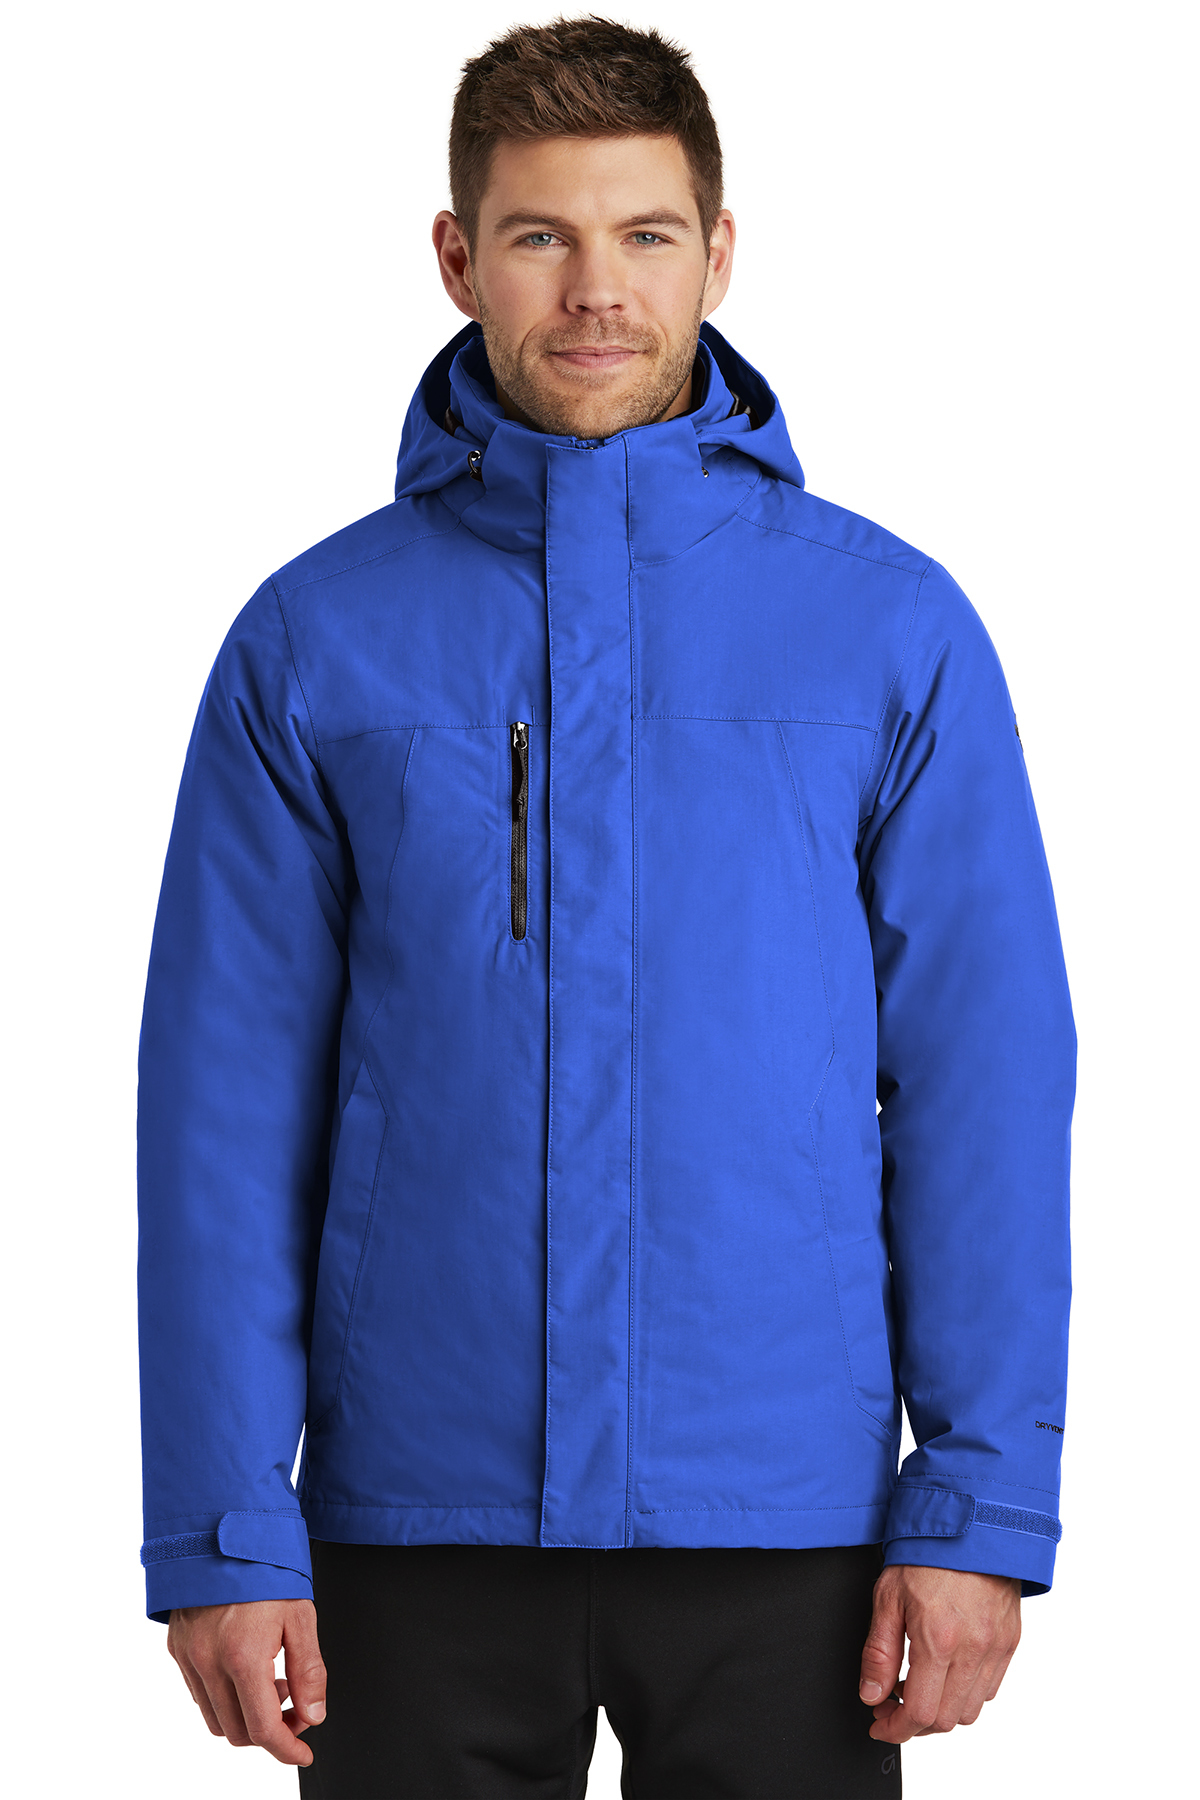 north face men's 3 in 1